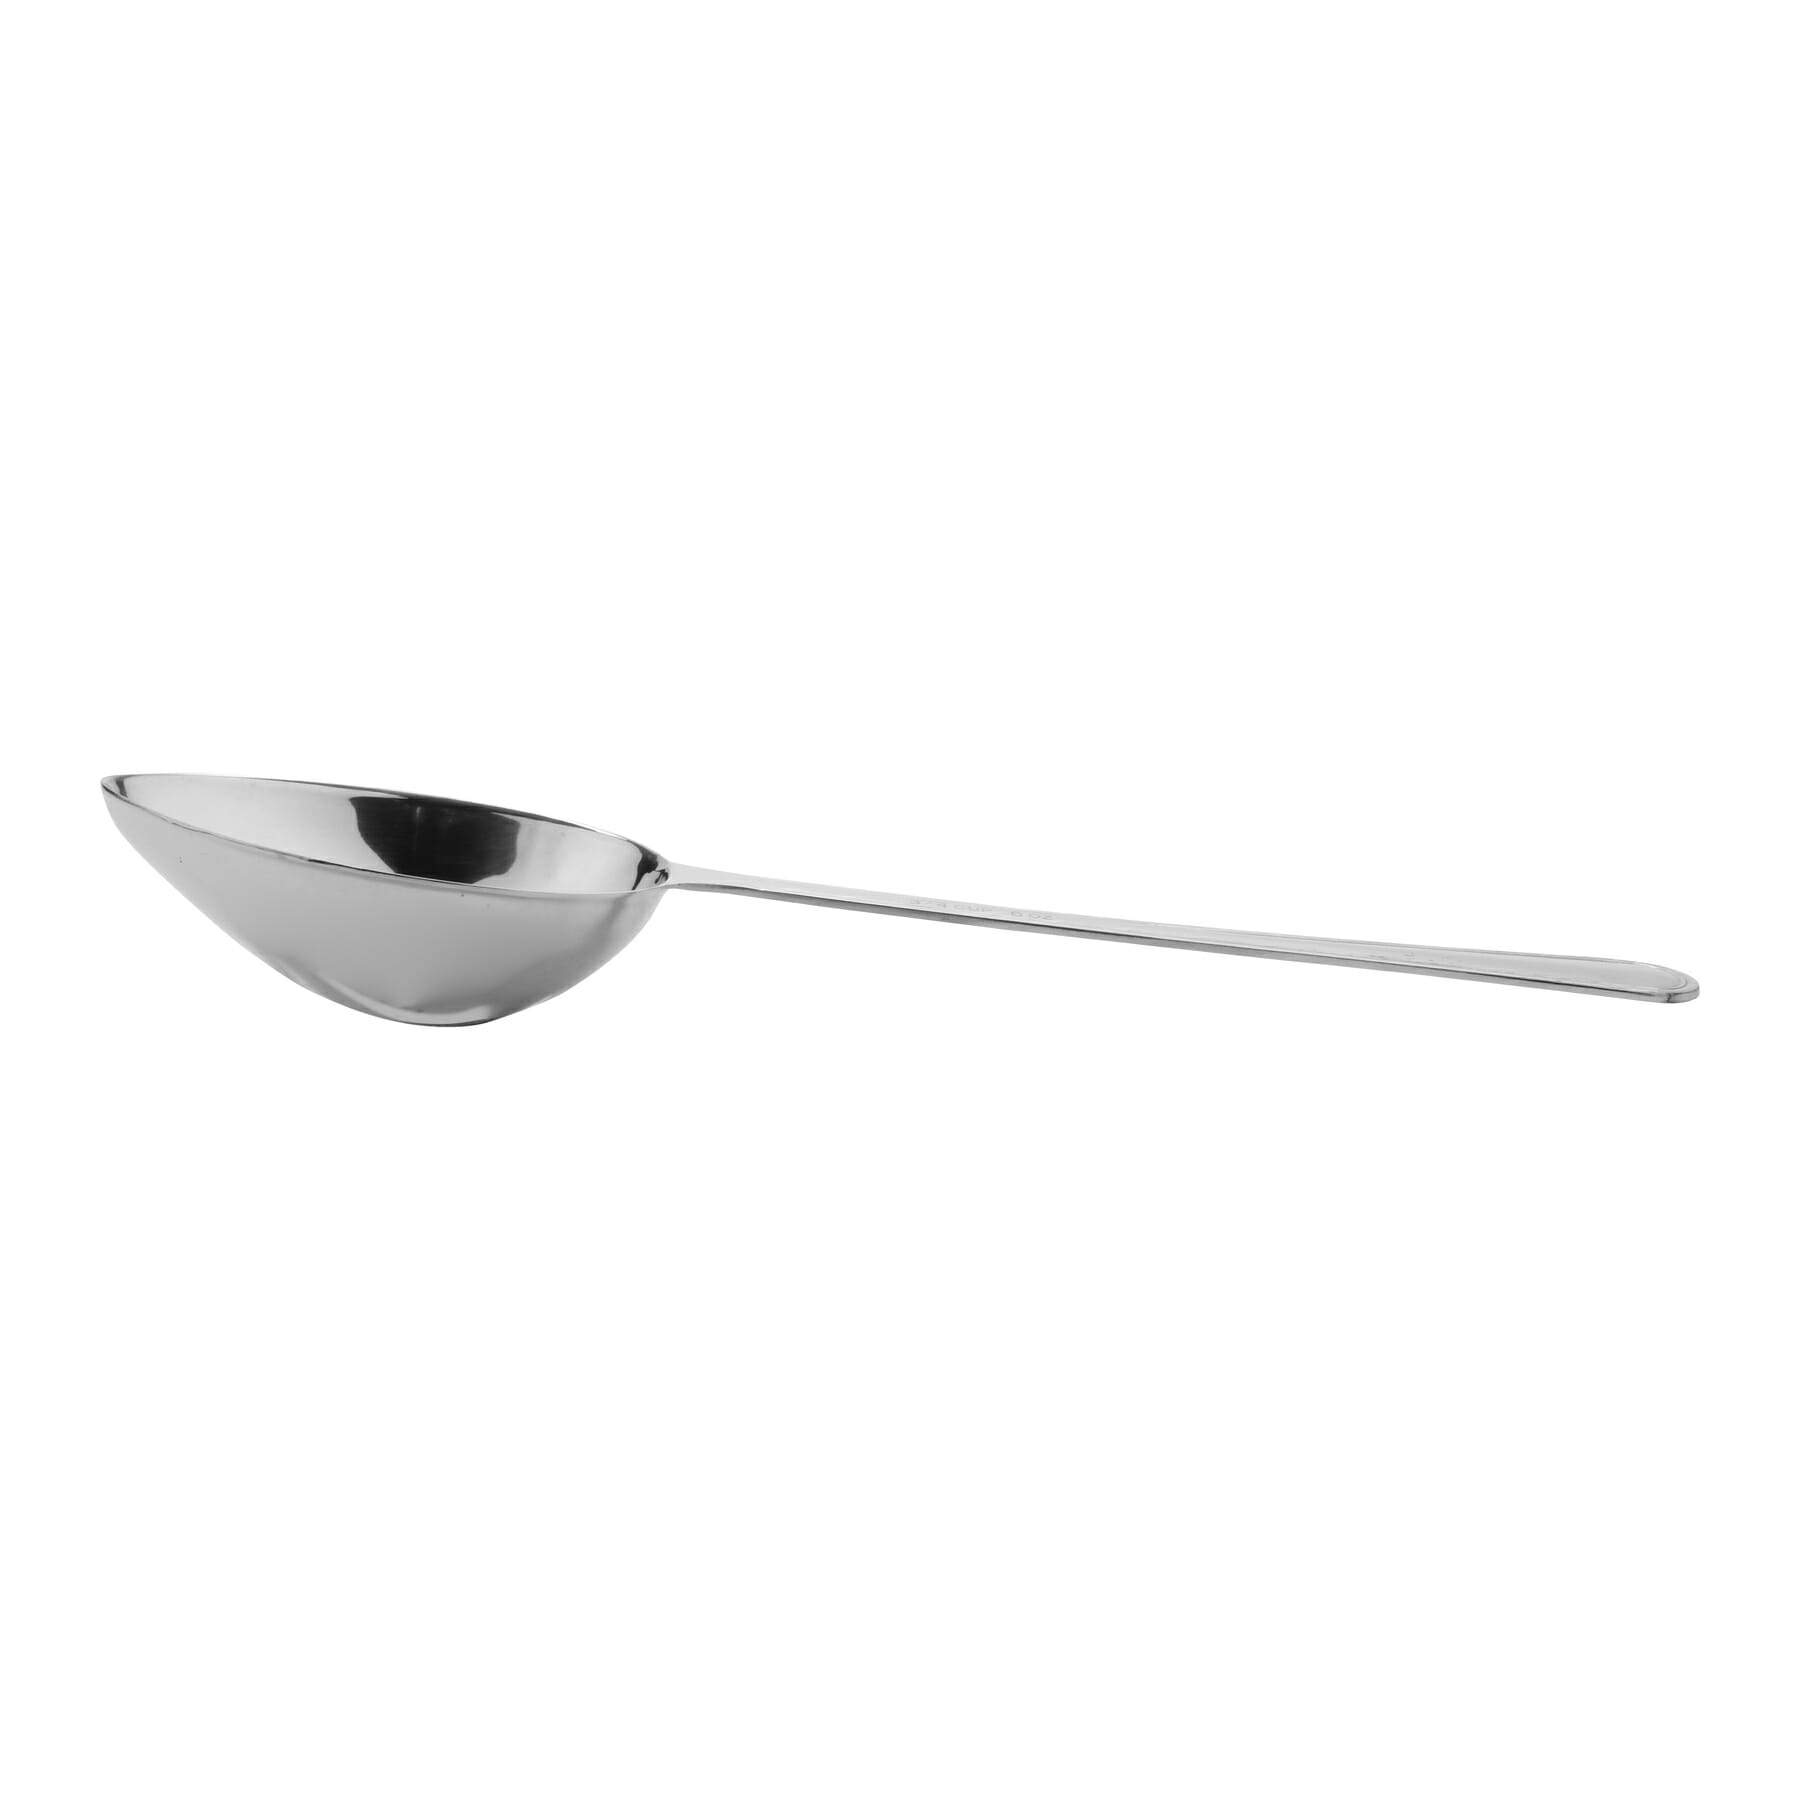 BSRIM-26 - 13.50 portion control spoon 6 oz , slotted, 96@ per